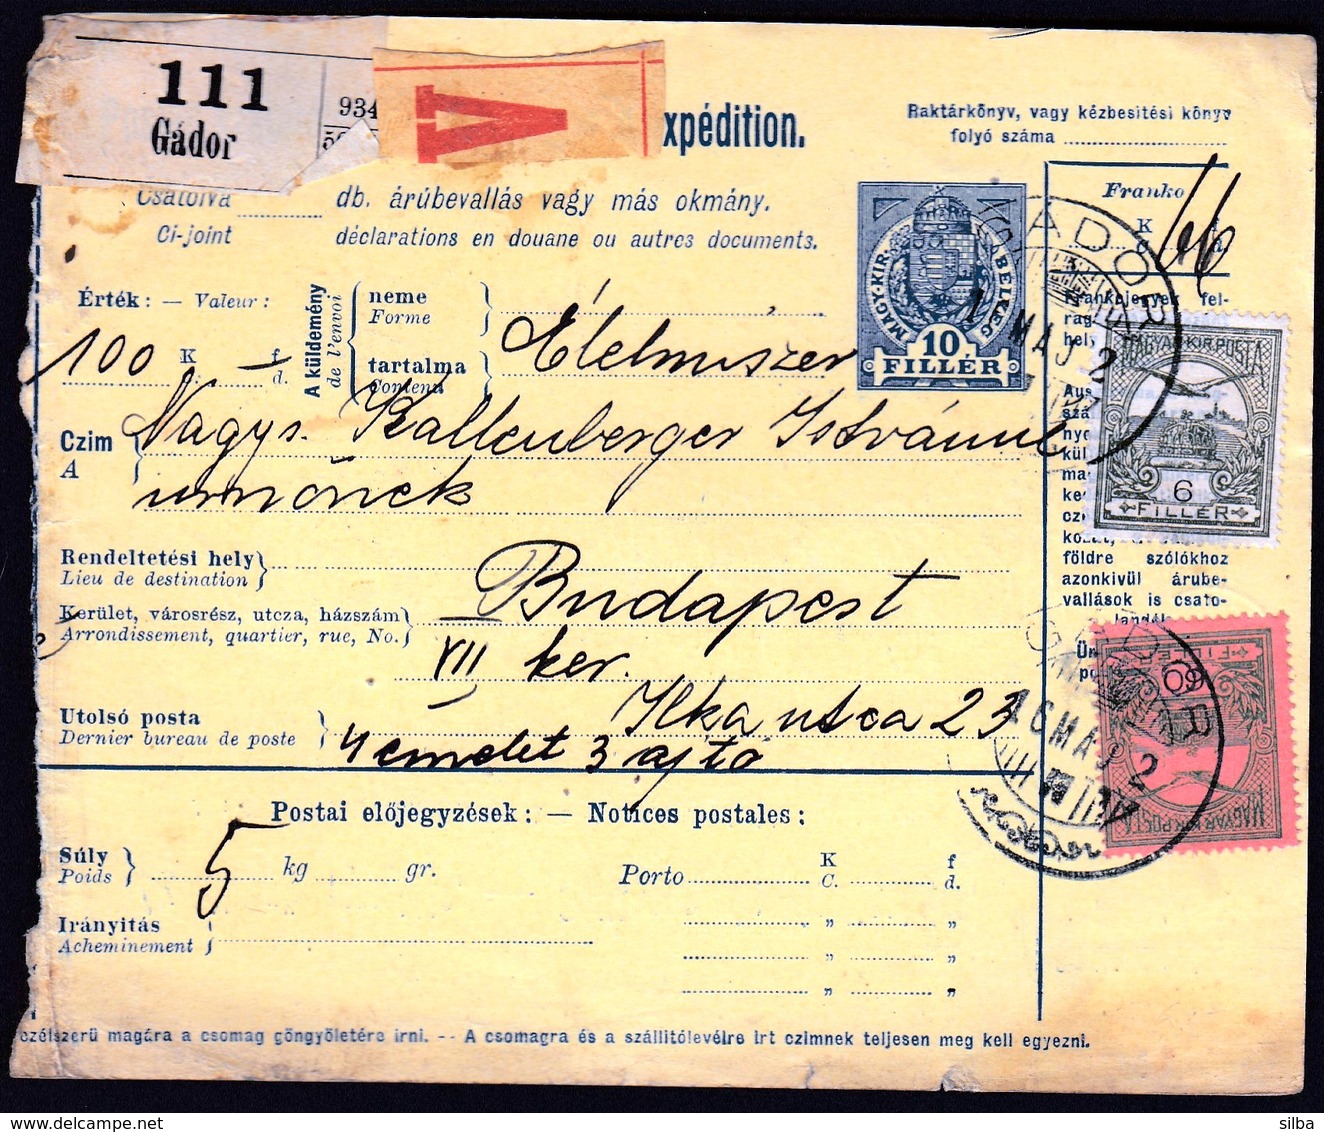 Hungary Gador 1916 / Parcel Post, Postai Szallitolevel, Bulletin D' Expedition / To Budapest - Parcel Post